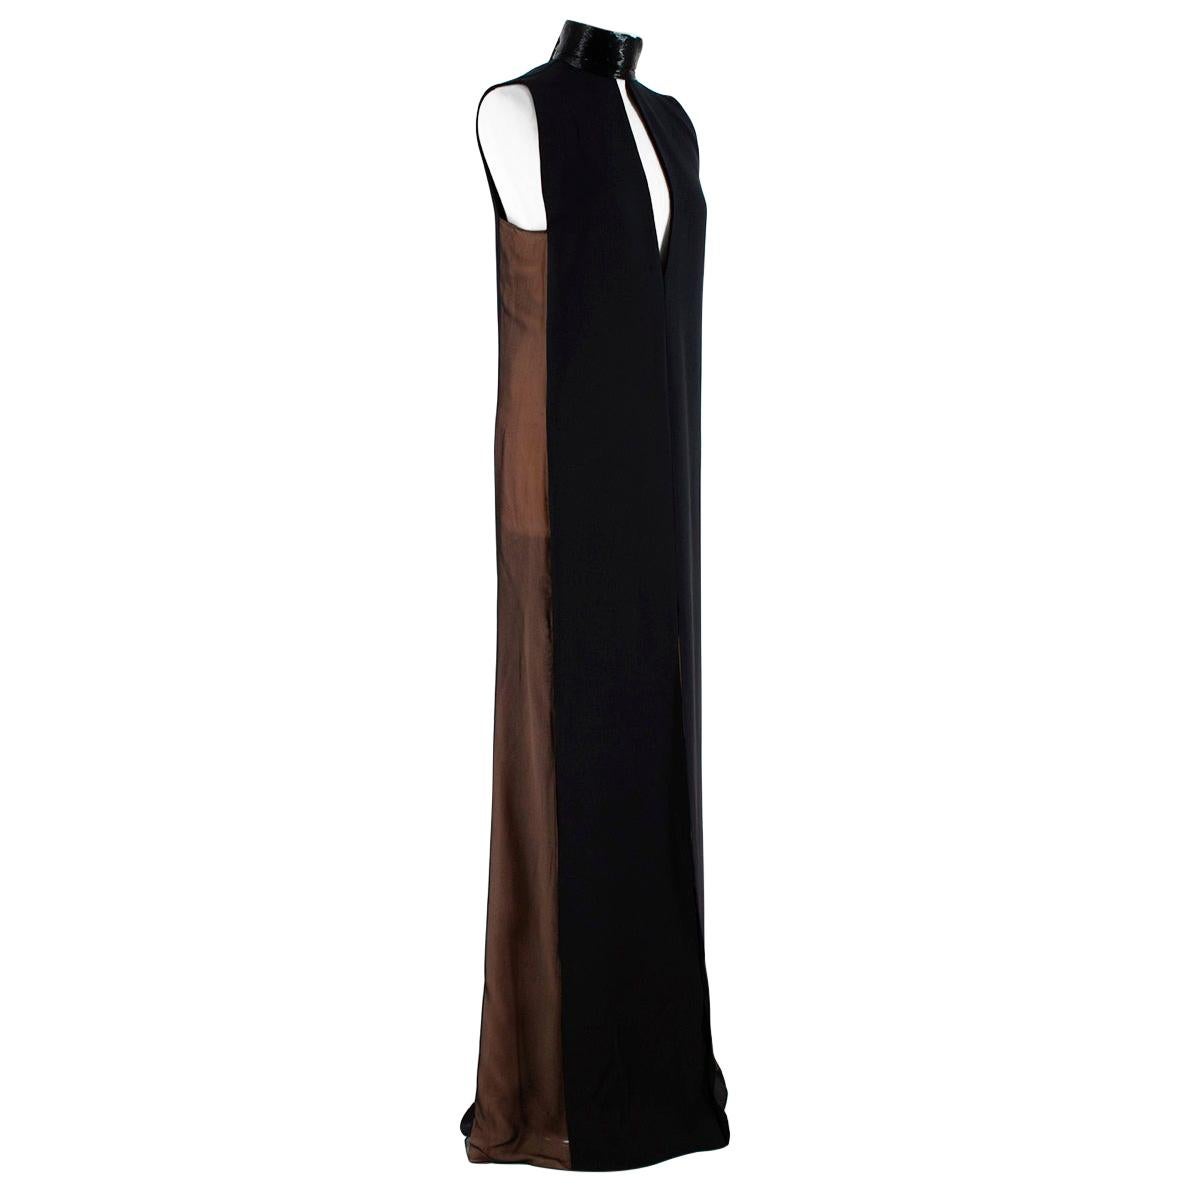 Emilio Pucci Black Silk blend High Neck Beaded Gown

-Extremely elegant high neck design 
-Luxurious beaded hight neck
-Gorgeous triple loop bow like detail to the back  
-Nude side panels to the sides 
-Front slit 
-Deep v shaped back cleavage